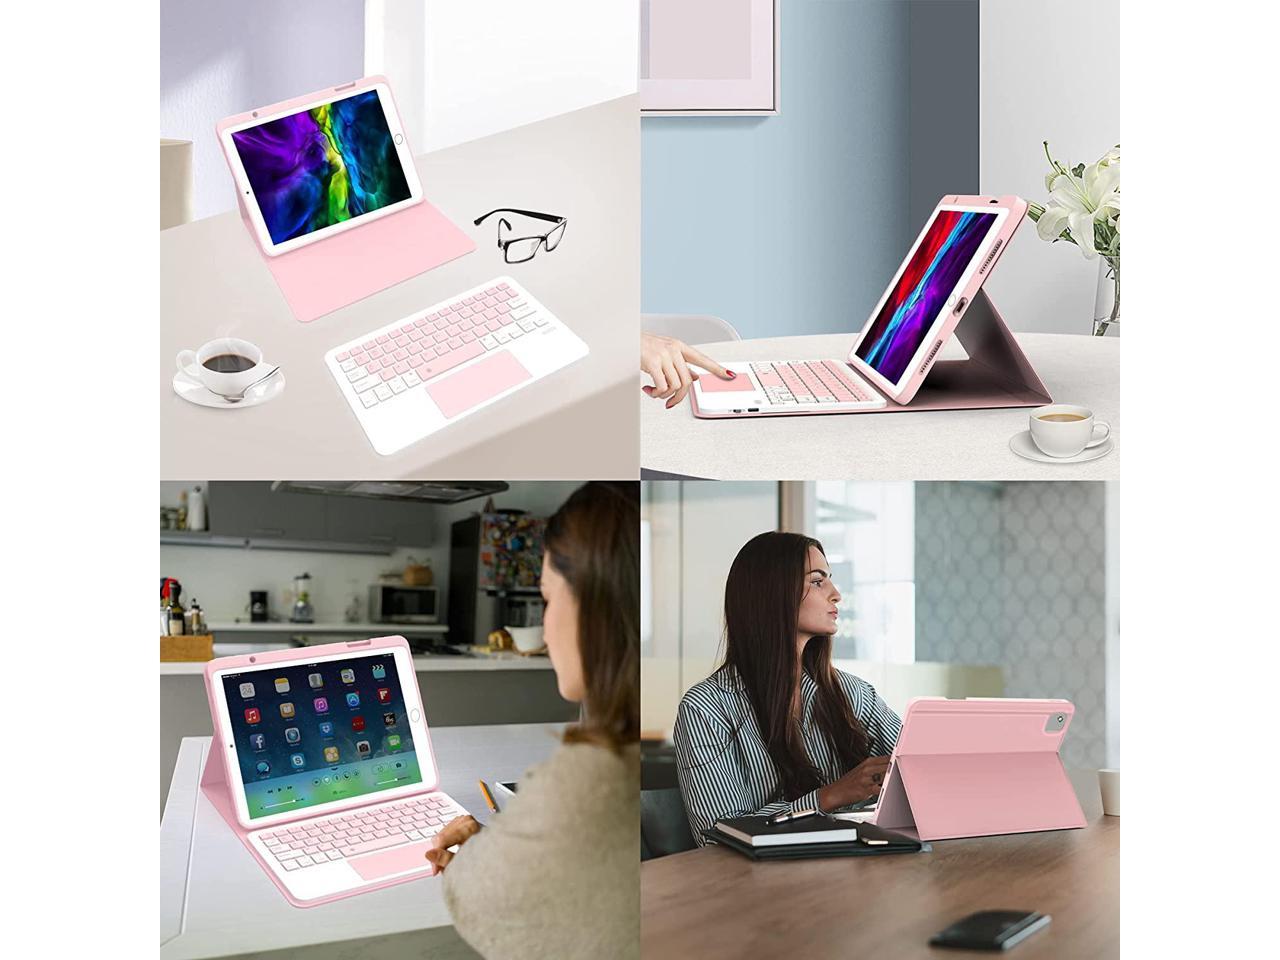 7th Generation Luonih Touchpad Keyboard Case for iPad 9th 8th 2021/2020/2019 10.2 Inch,Detachable Wireless Keyboard,Smart Protective Cover for iPad Air 3rd Gen 2019/iPad Pro 10.5